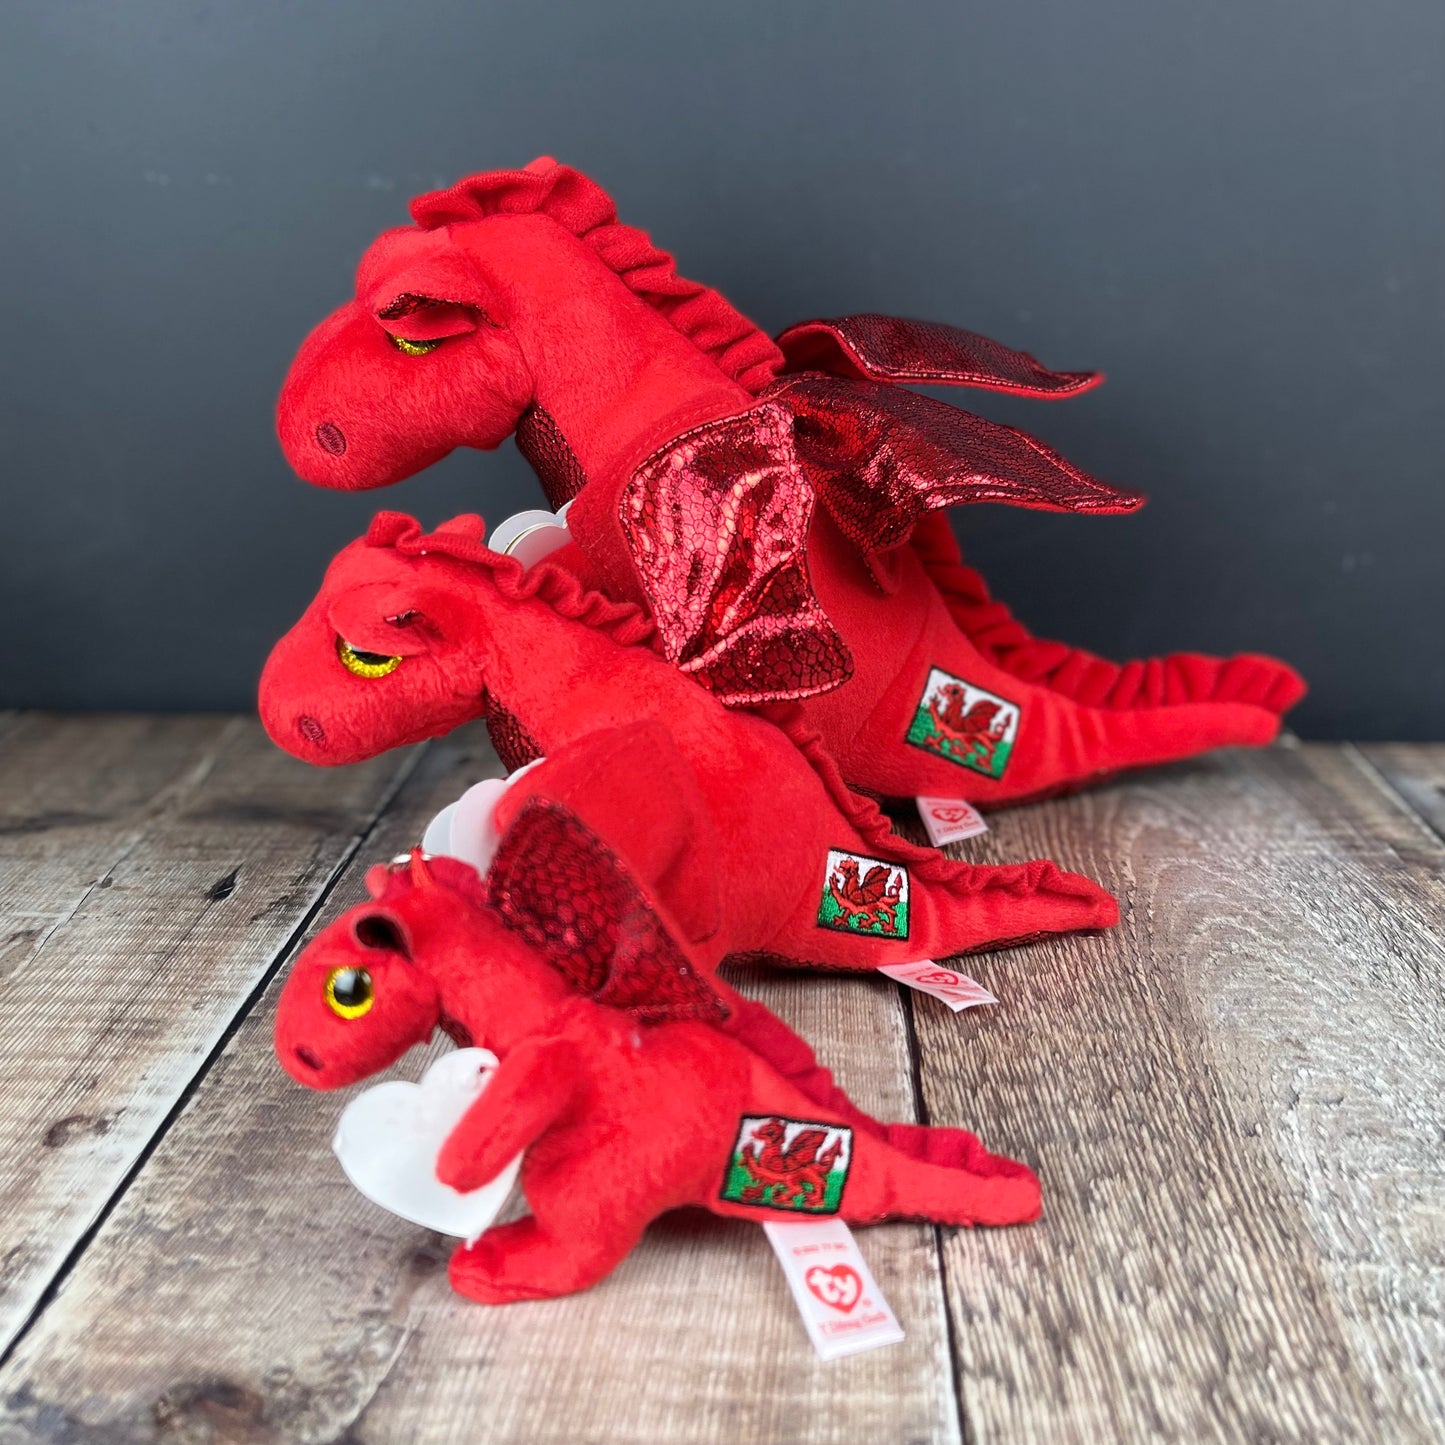 Welsh Dragon Charm by TY